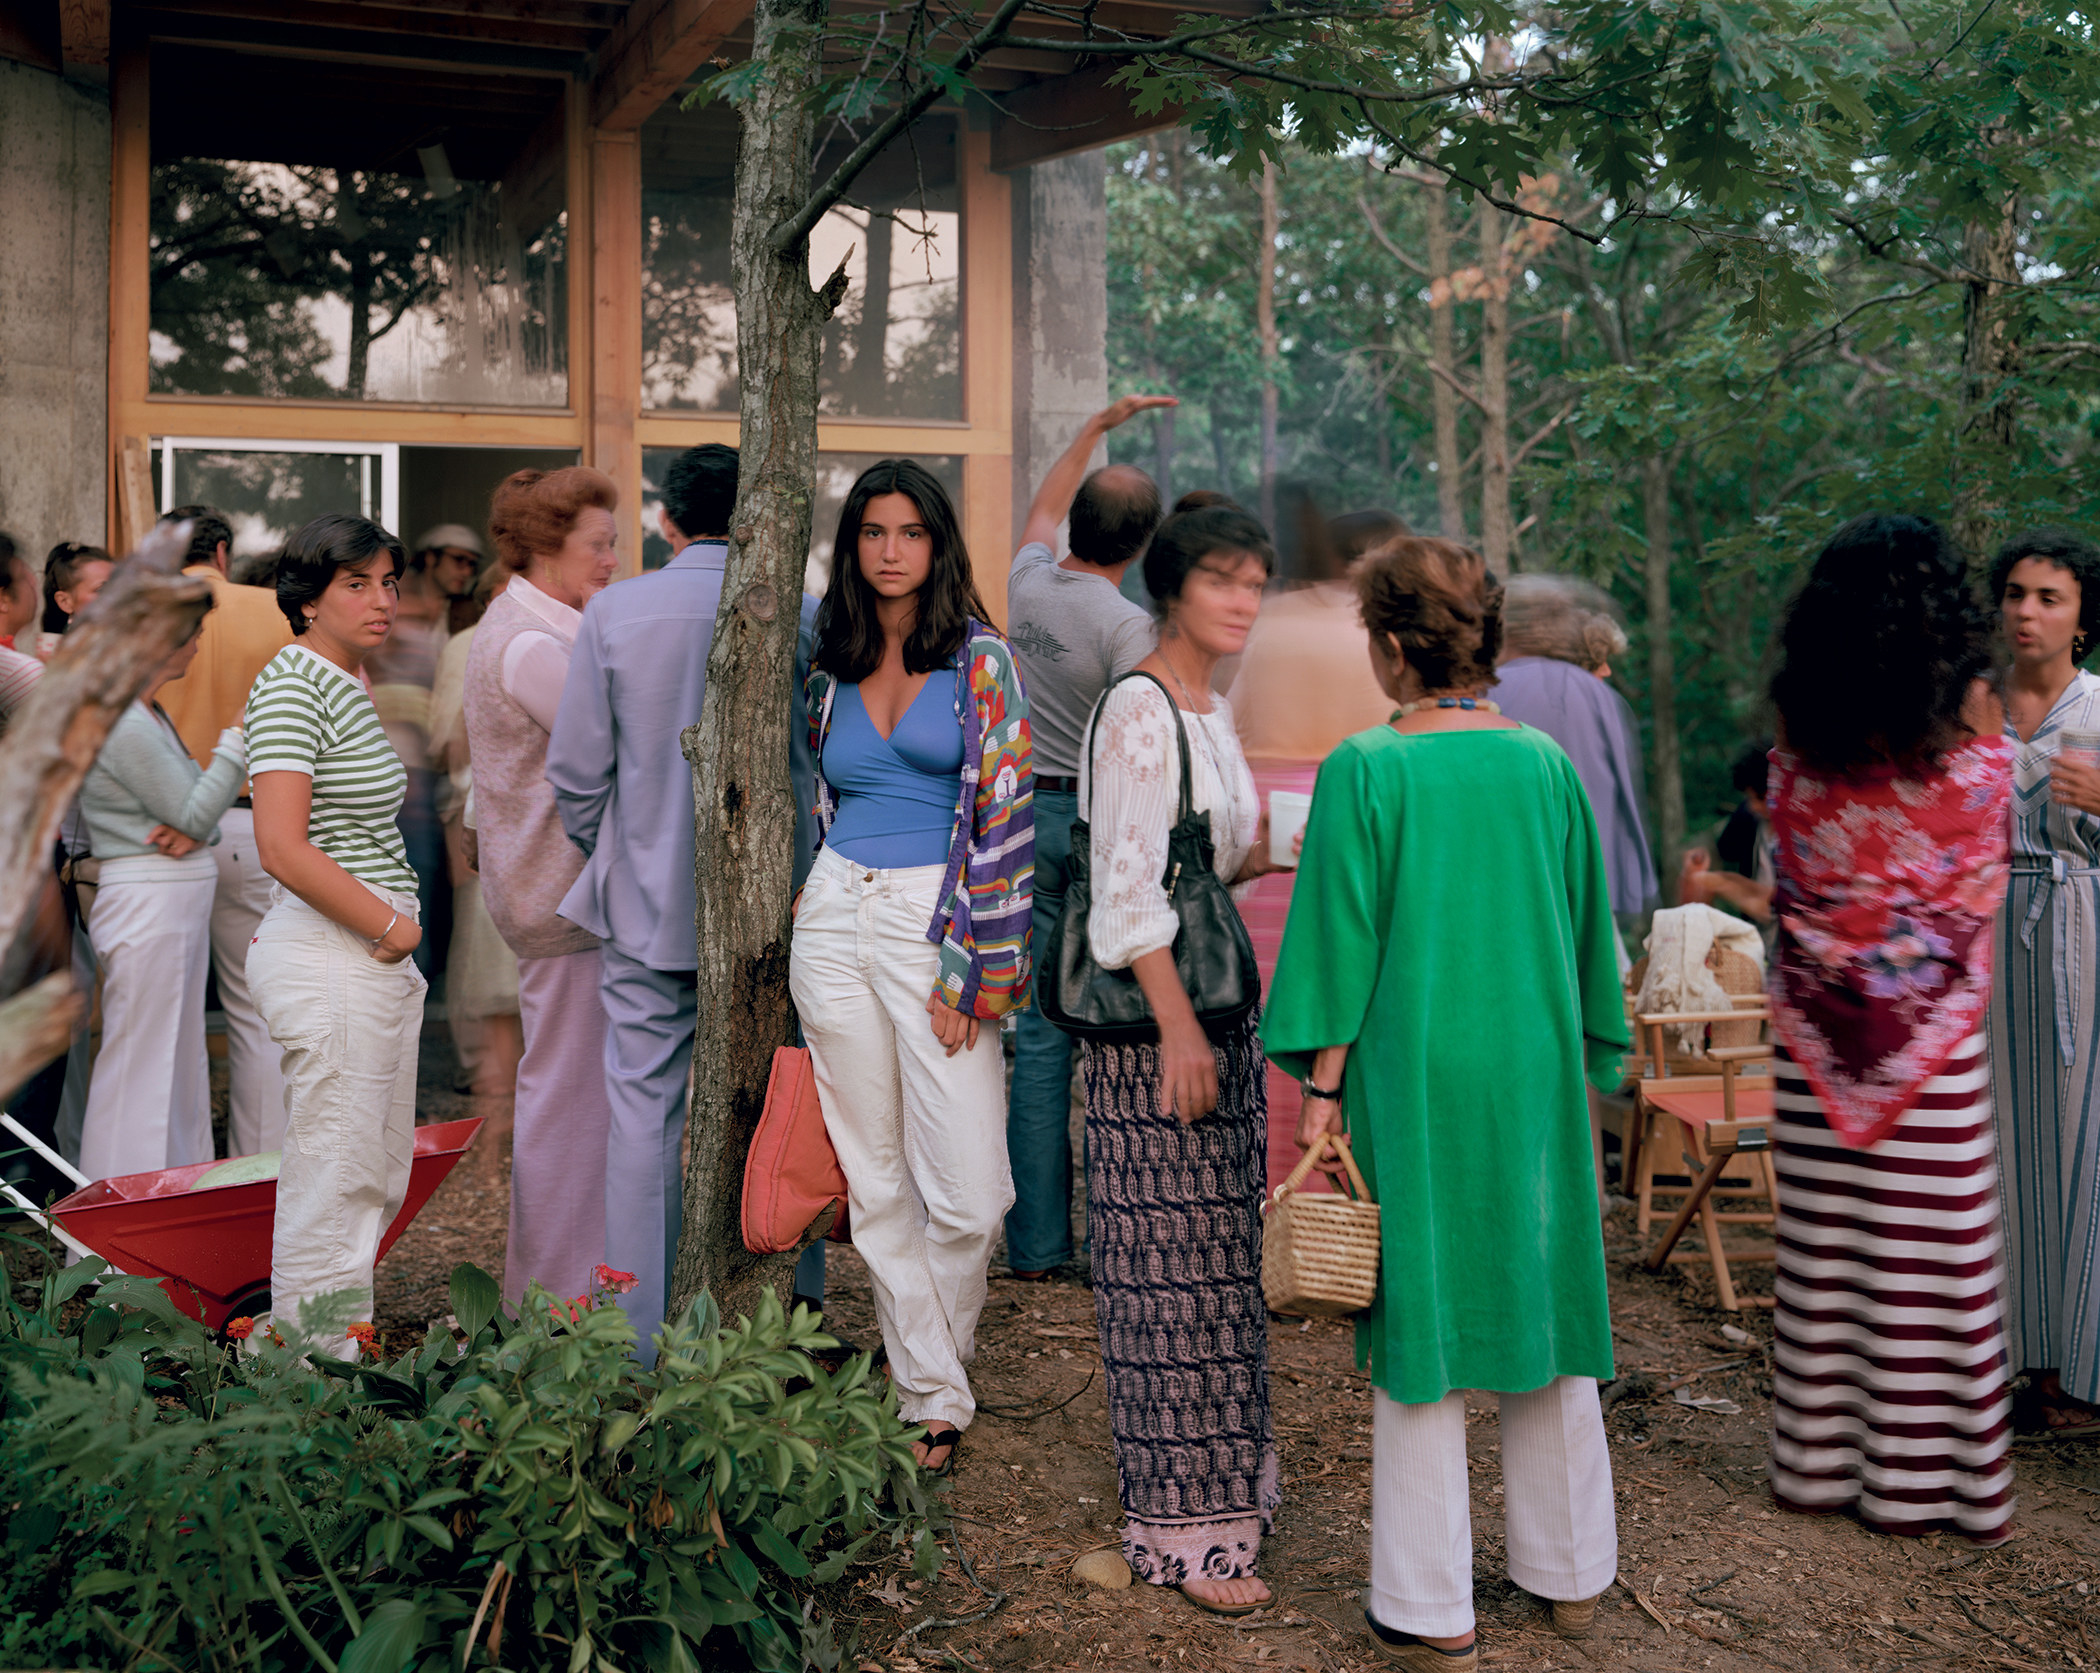 A young woman stands next to a tree and stares into the camera while surrounded by people at a crowded function